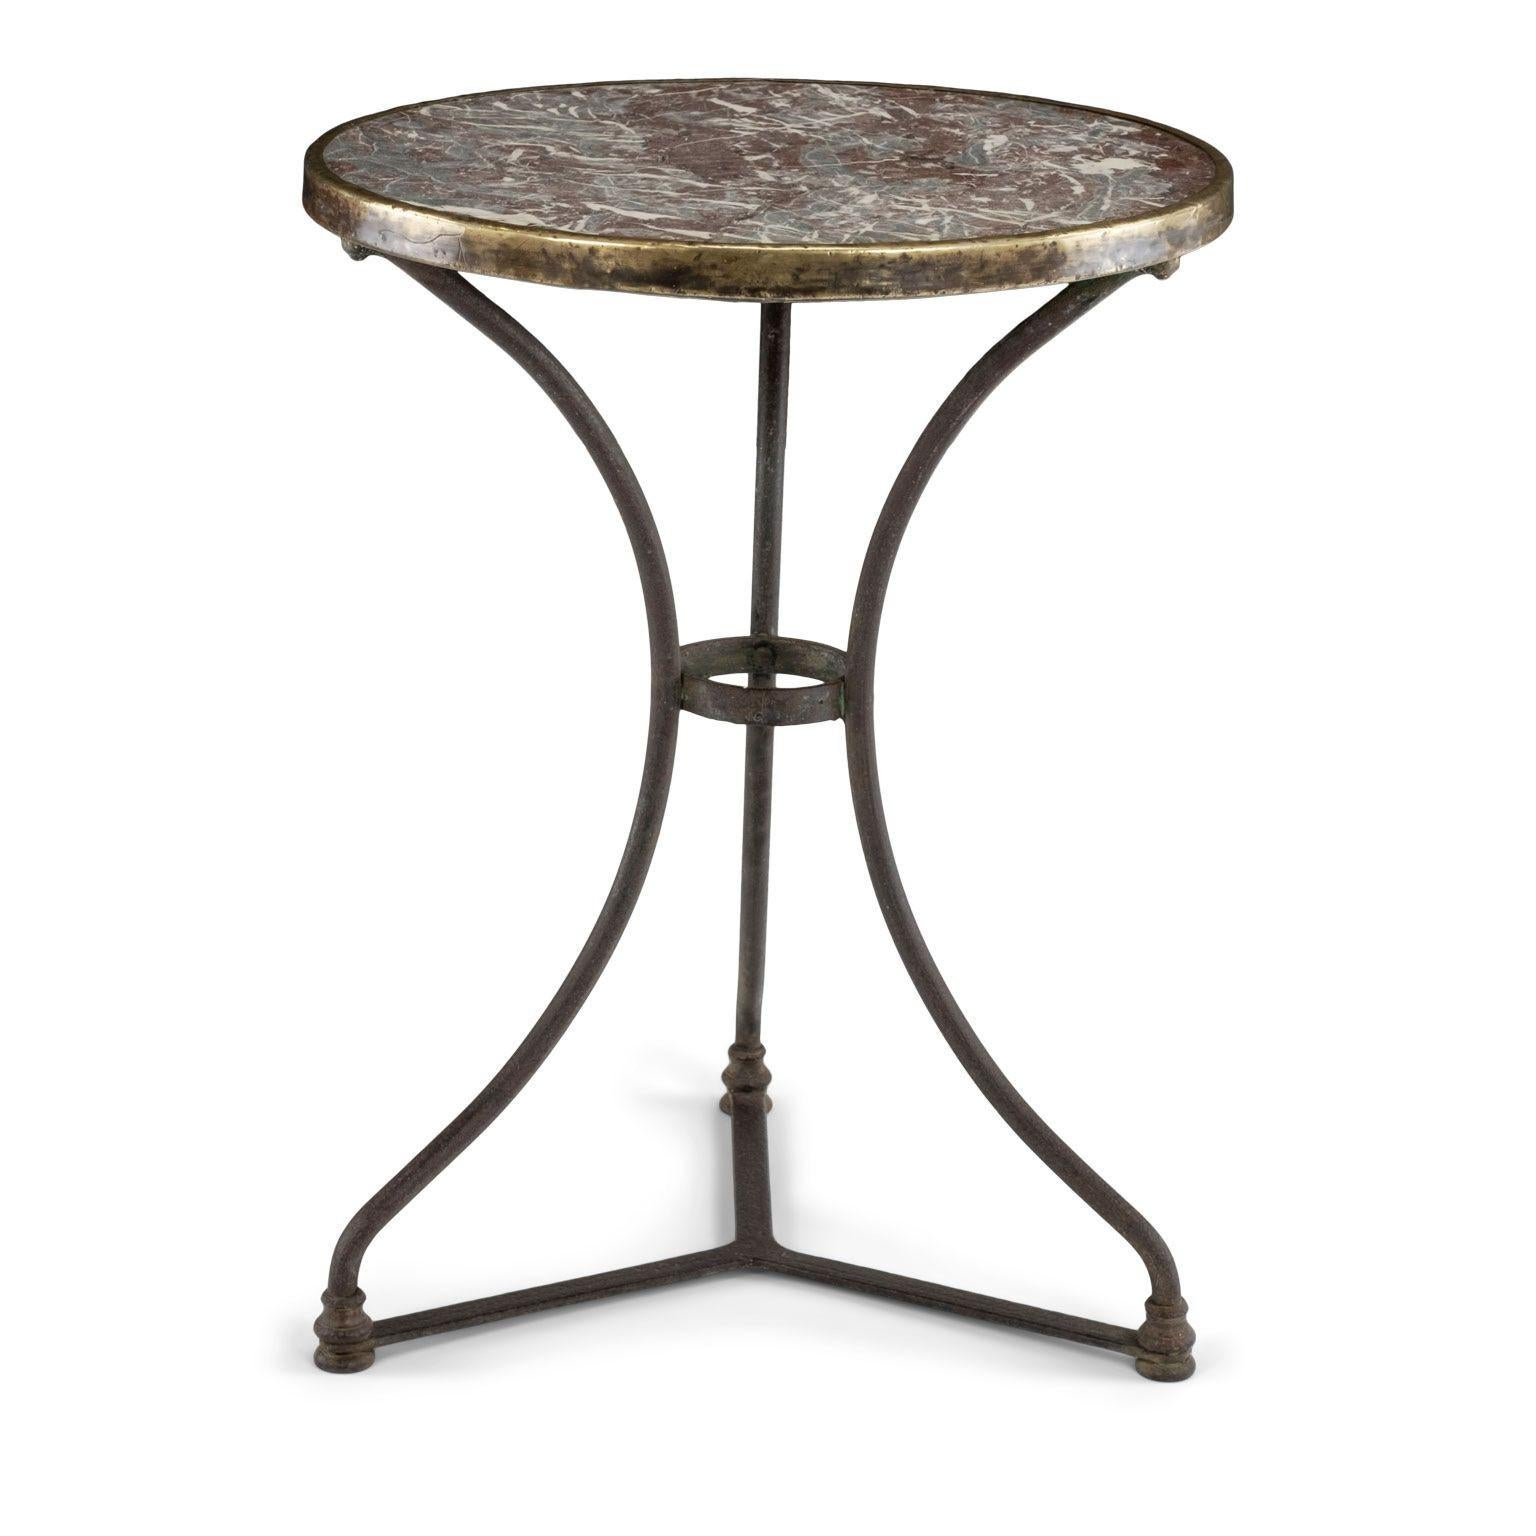 Red marble top French bistro table circa 1890-1909. Round marble top in rouge, gray and white veins, secured in place with a gilded steel rim, atop a forged iron base.